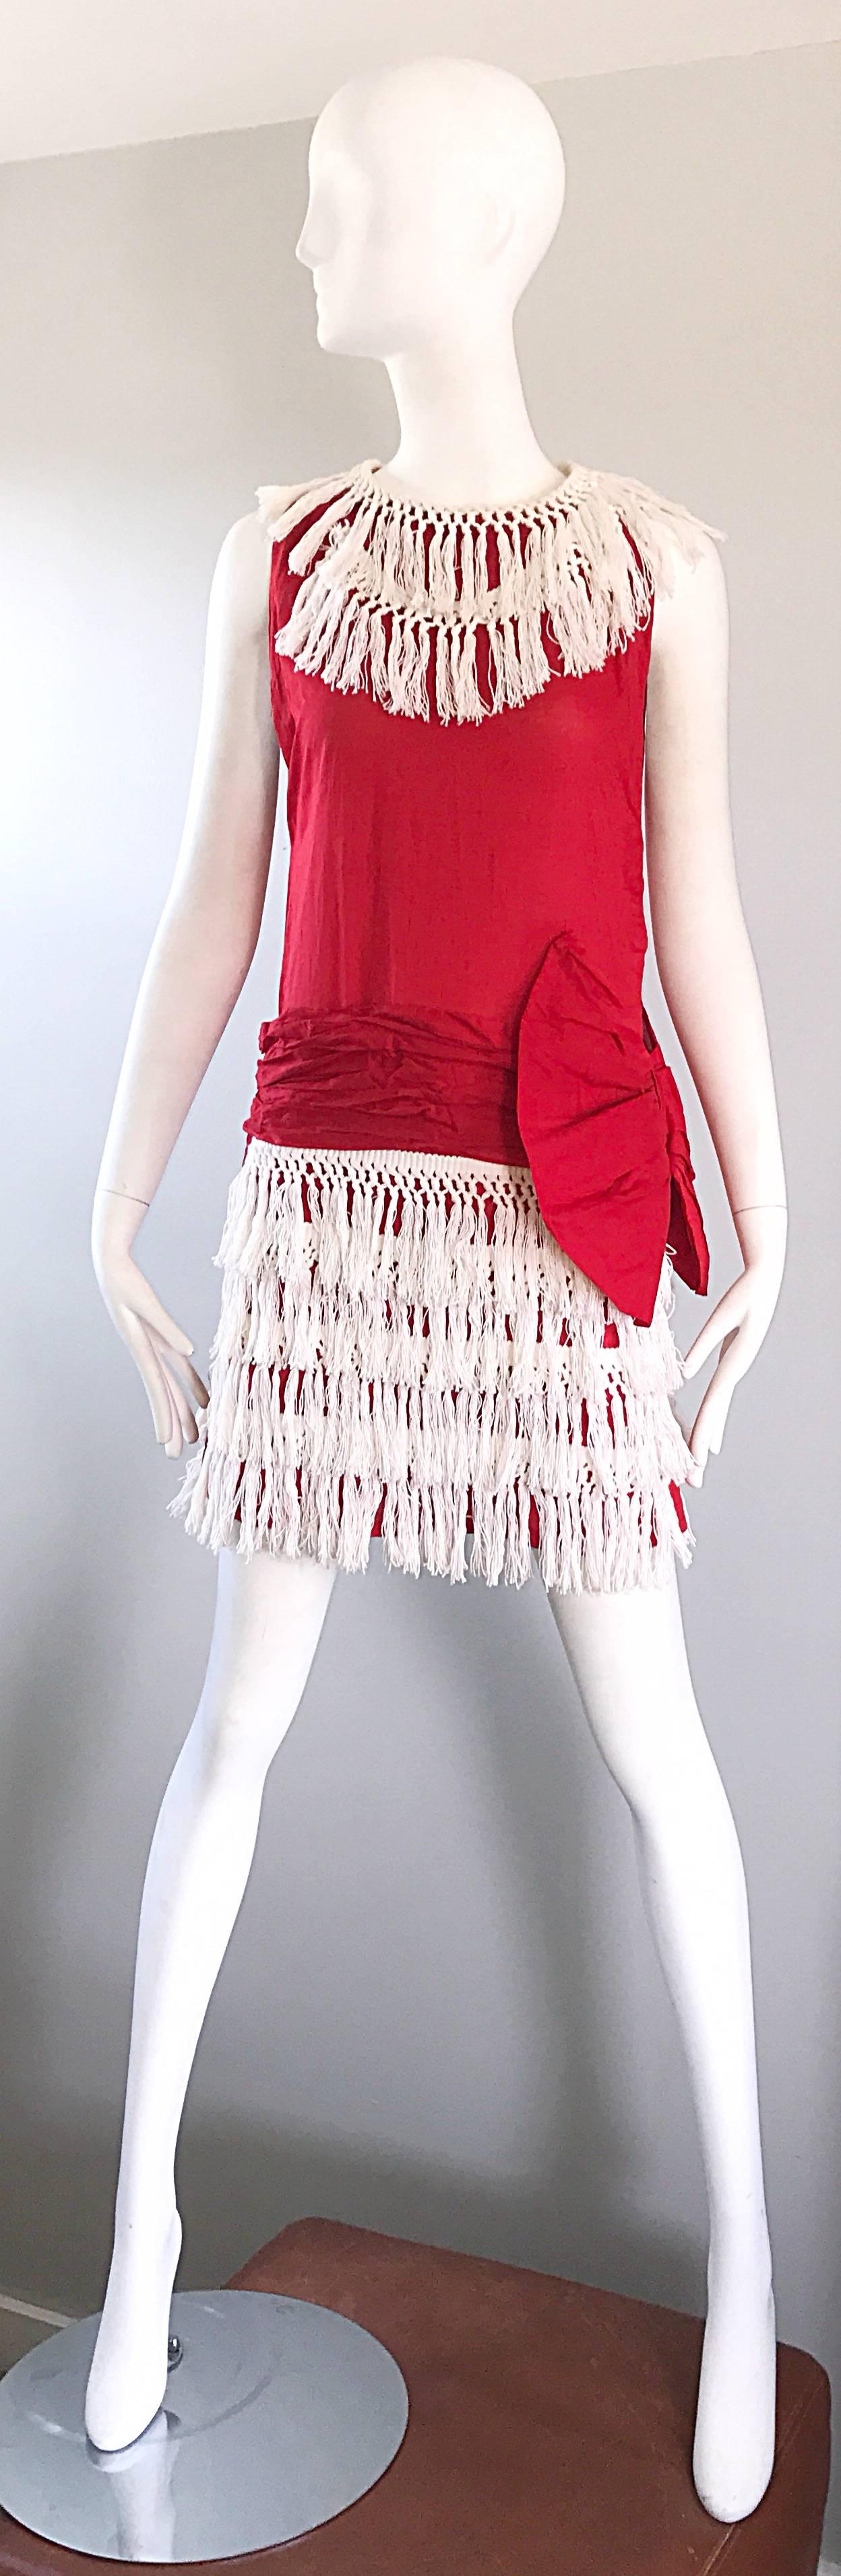 Amazing and rare 1960s does 1920 vintage 'Roaring 20s' demi couture dress! There is so much detail to this gem! Most of the sewing was done by hand. Intricate drop waist detail with an Avant Garde oversized bow. Panels of white fringe were hand-sewn